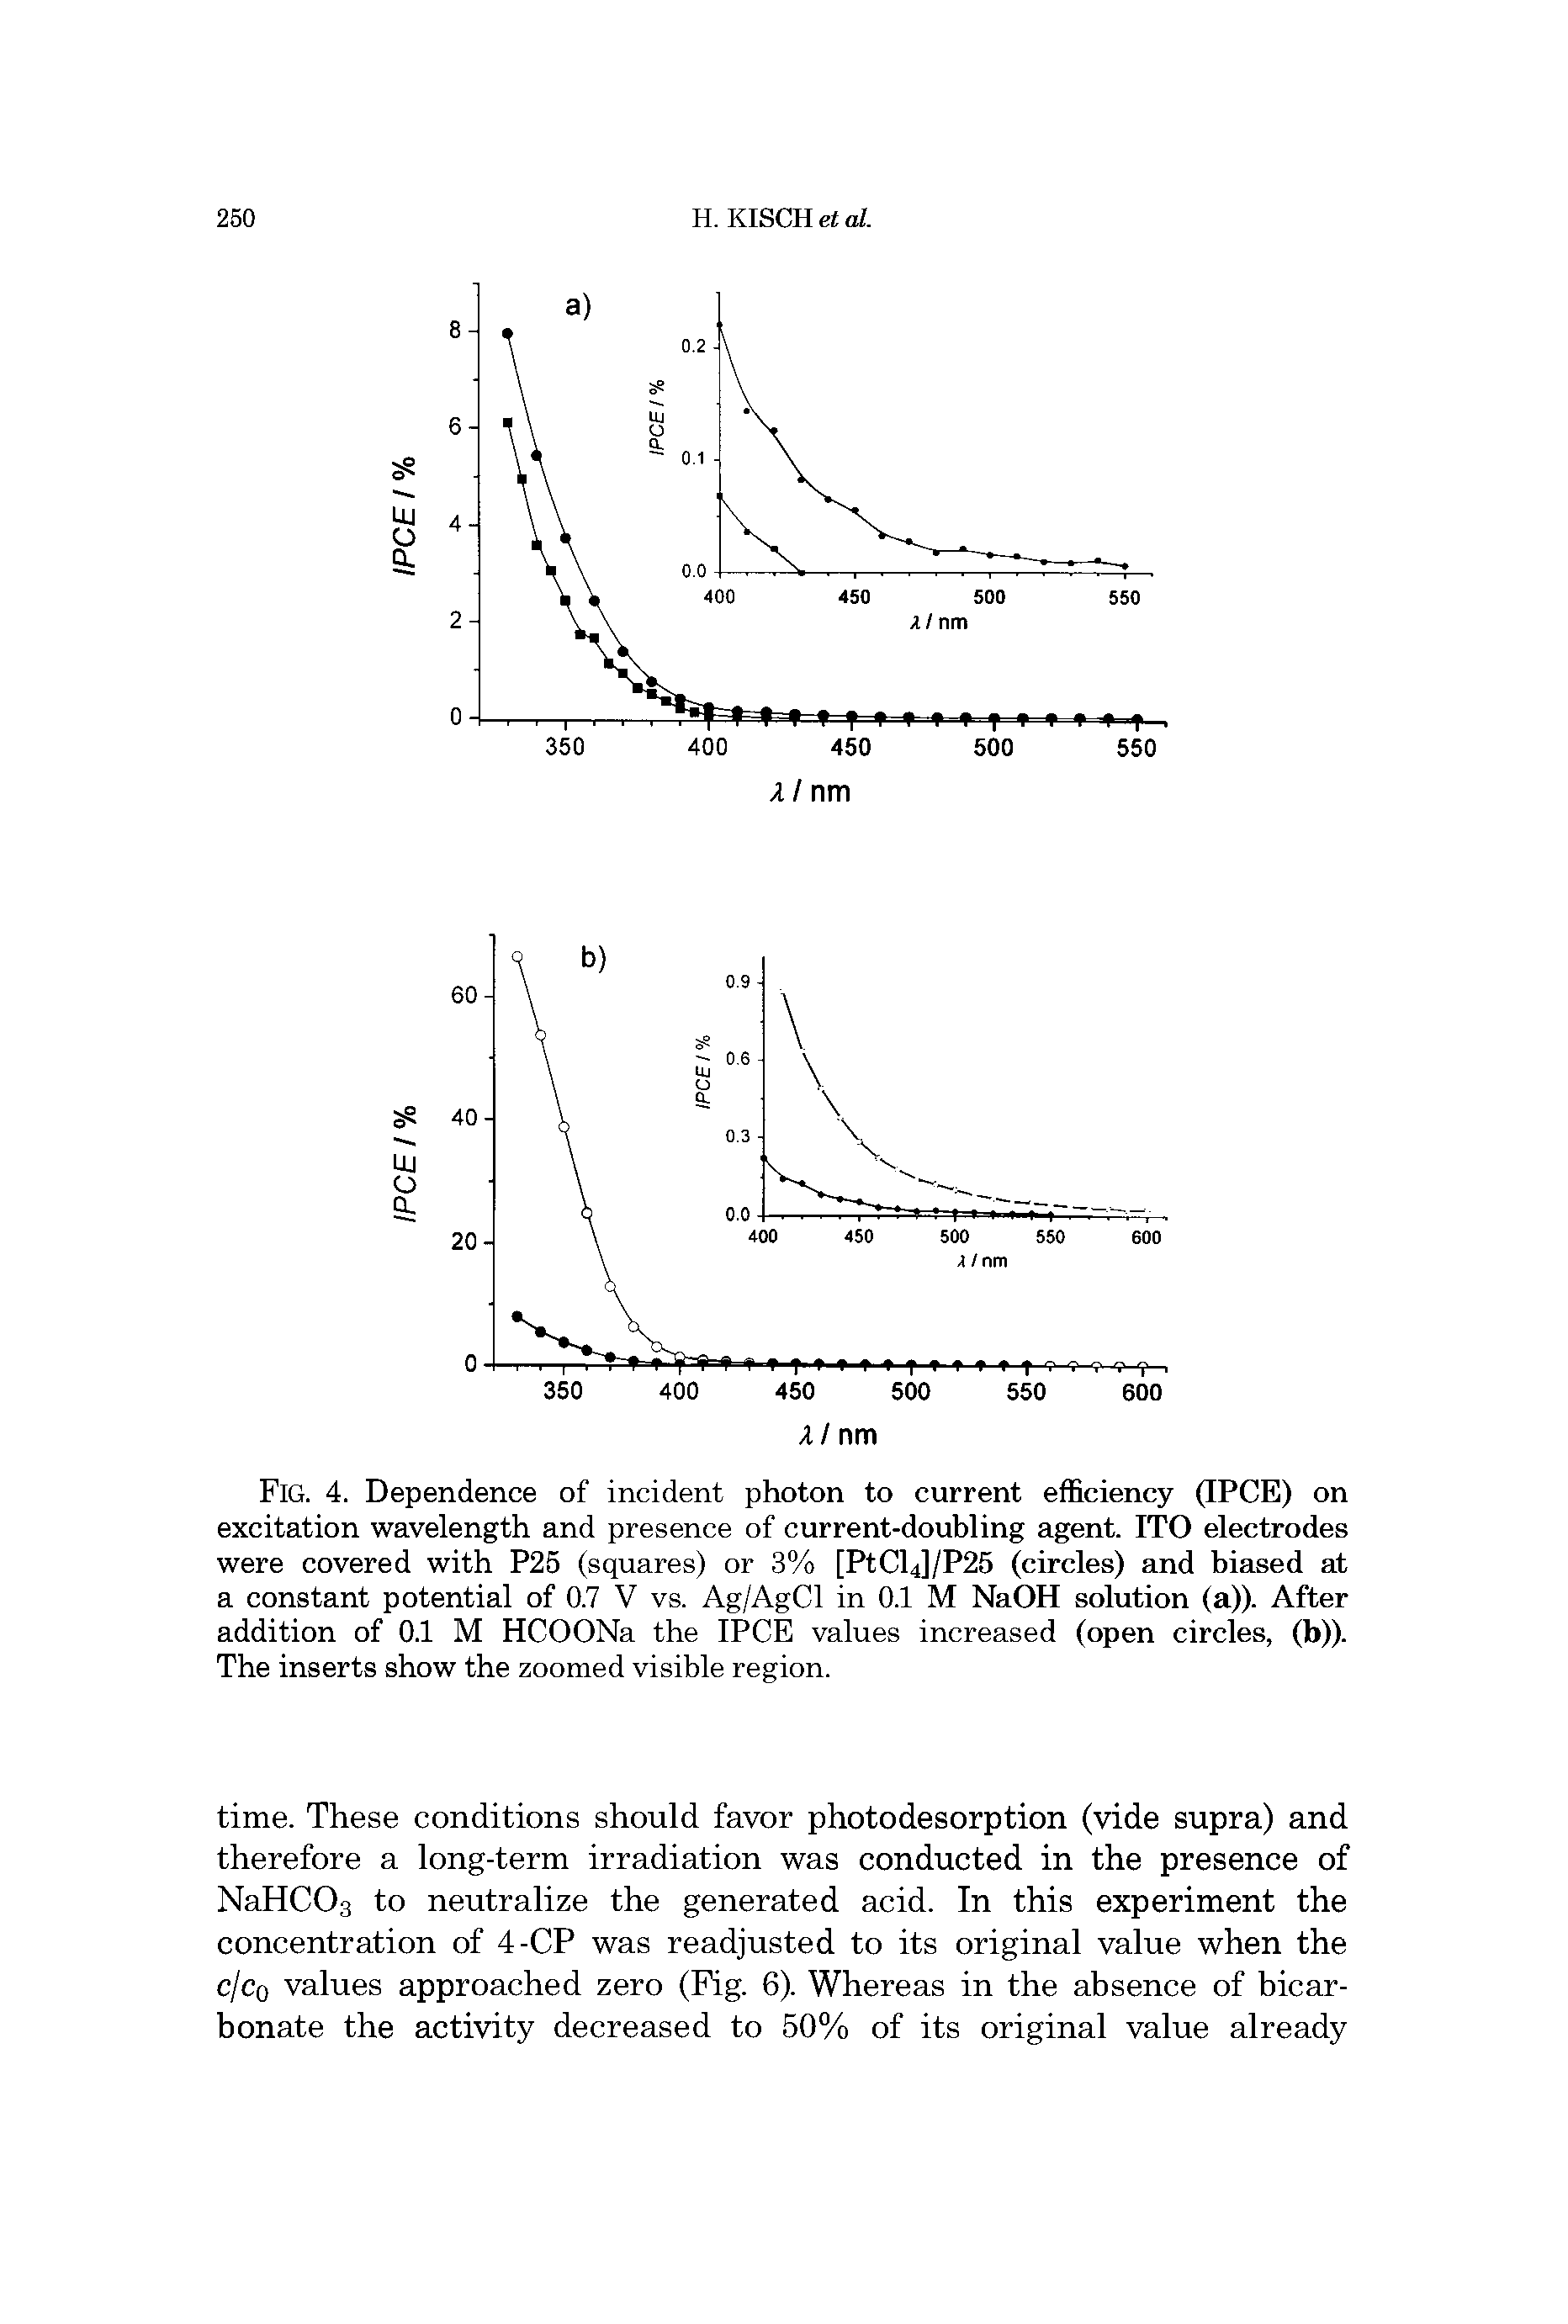 Fig. 4. Dependence of incident photon to current efficiency (IPCE) on excitation wavelength and presence of current-doubling agent. ITO electrodes were covered with P25 (squares) or 3% [PtCl4]/P25 (circles) and biased at a constant potential of 0.7 V vs. Ag/AgCl in 0.1 M NaOH solution (a)). After addition of 0.1 M HCOONa the IPCE values increased (open circles, (b)). The inserts show the zoomed visible region.